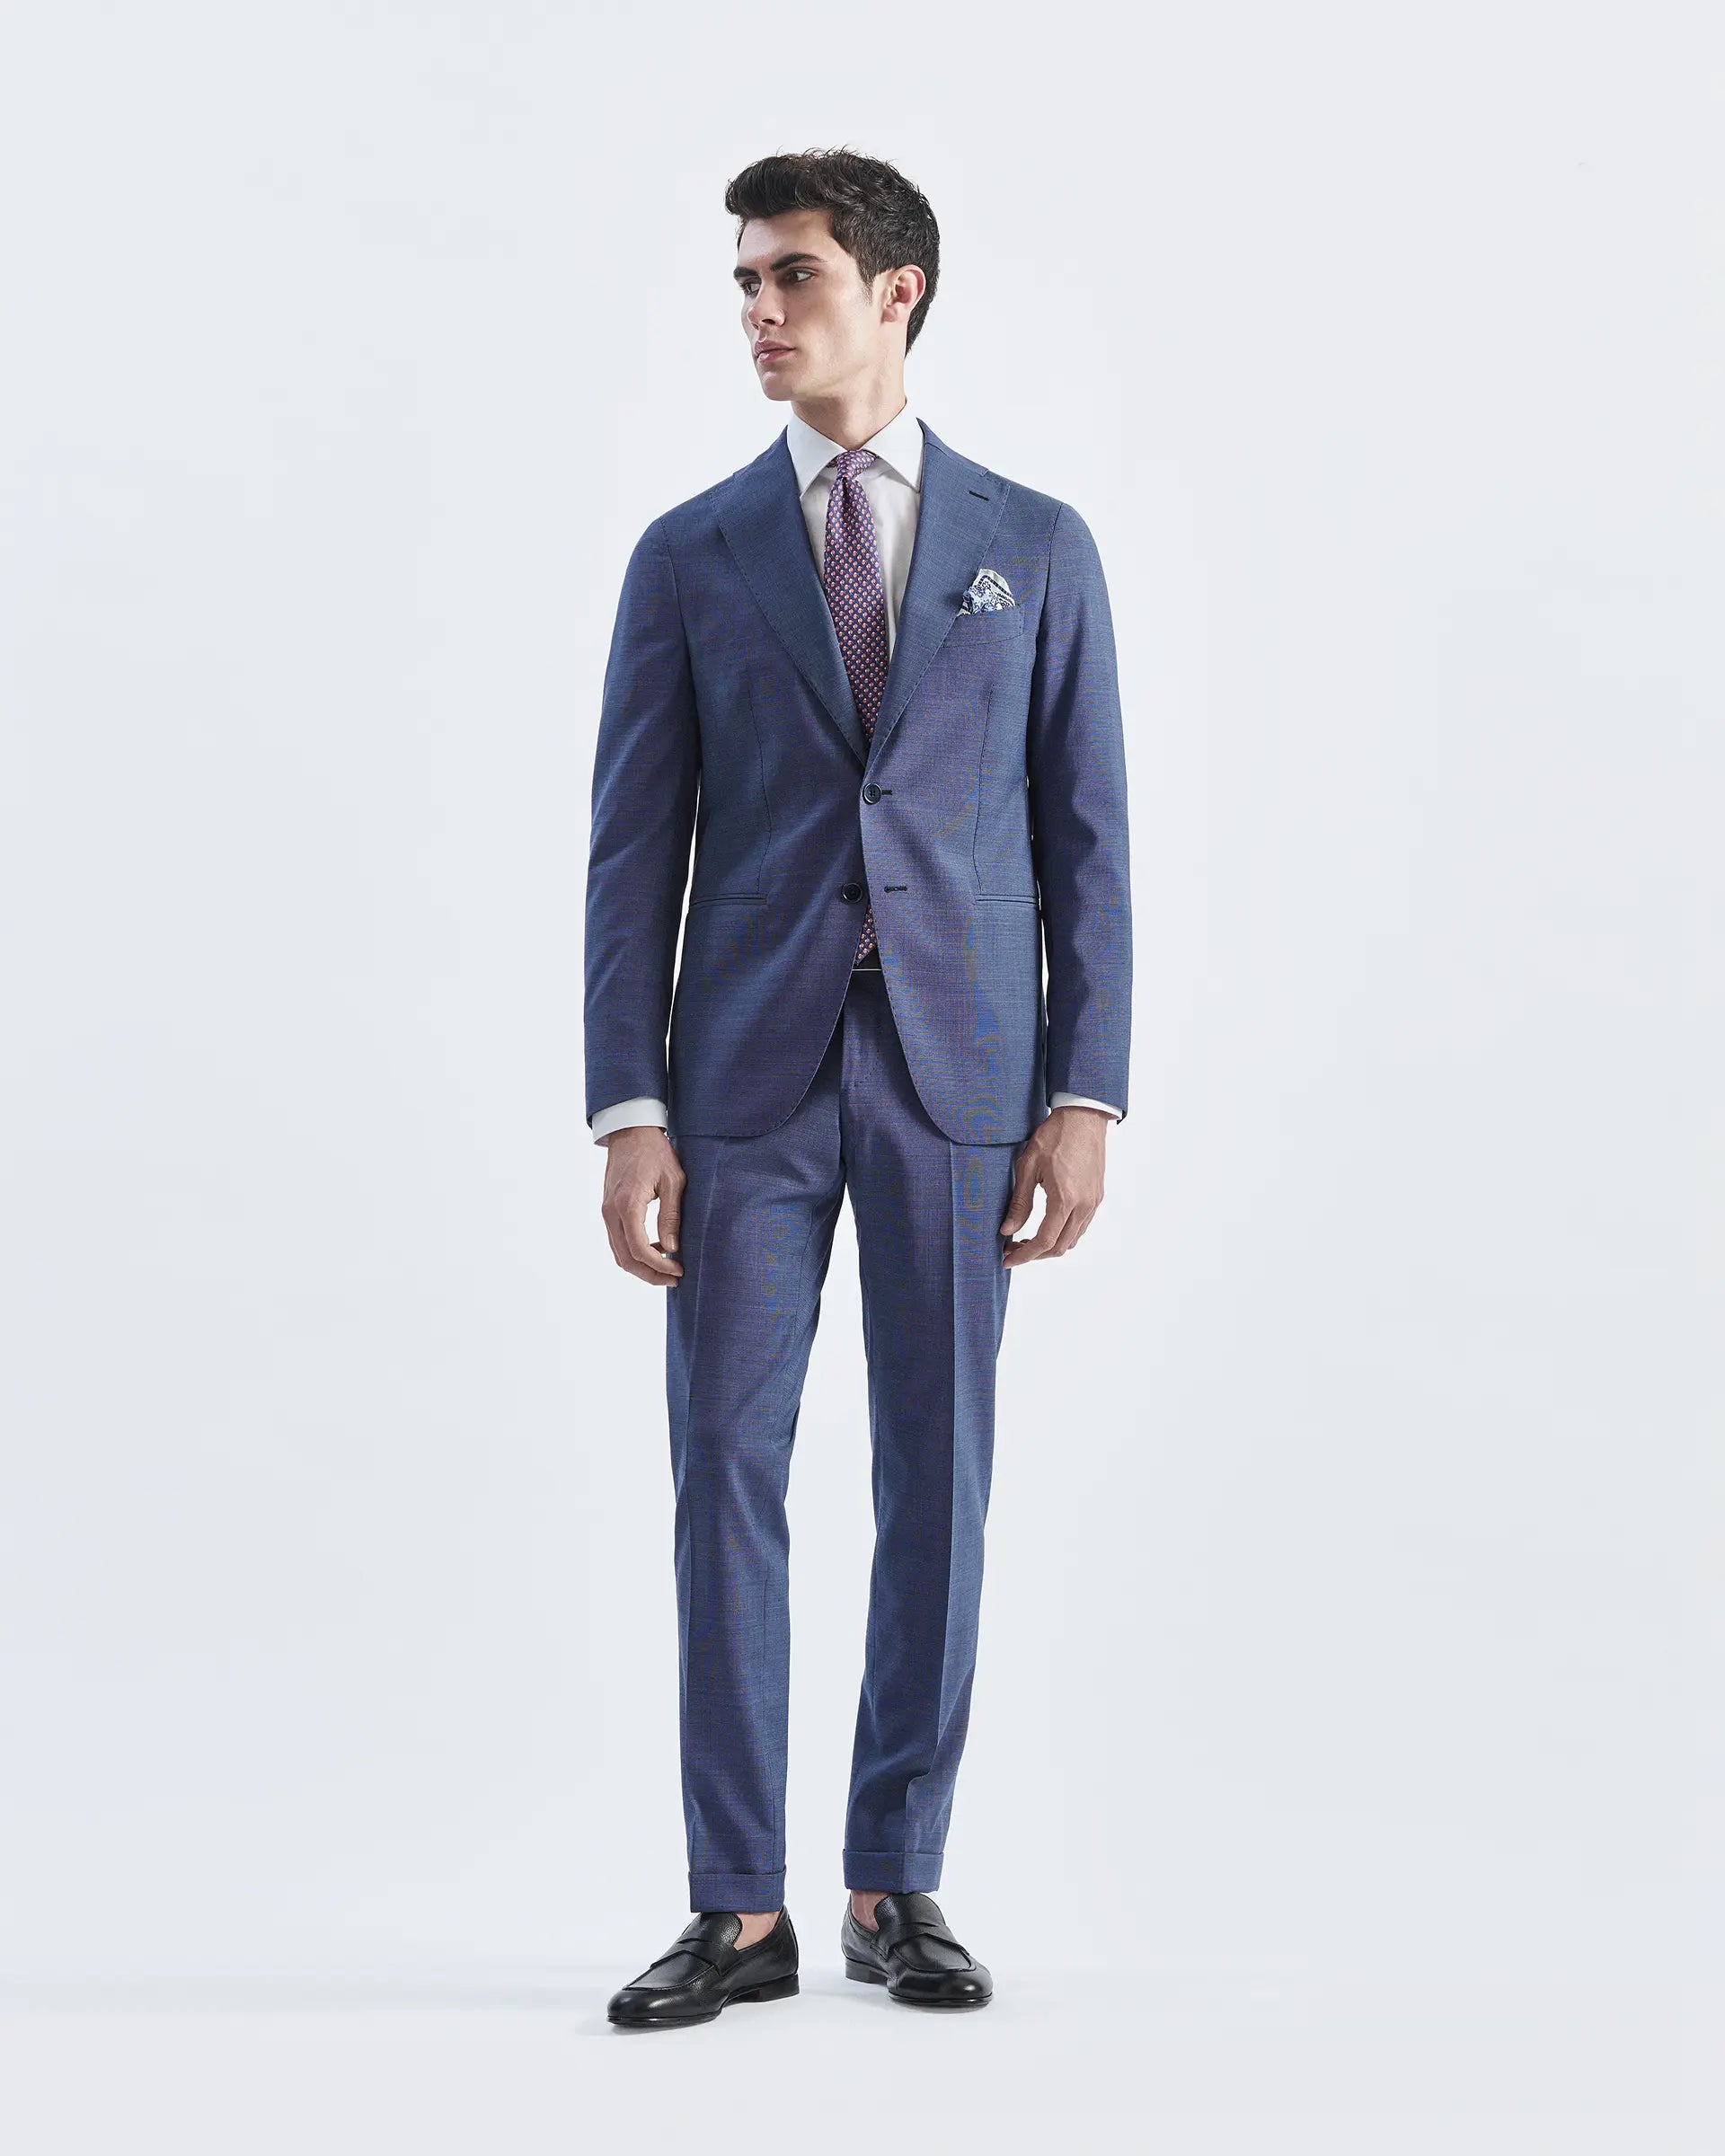 Avion Blue Pure Wool Suits - Tollegno Fabric